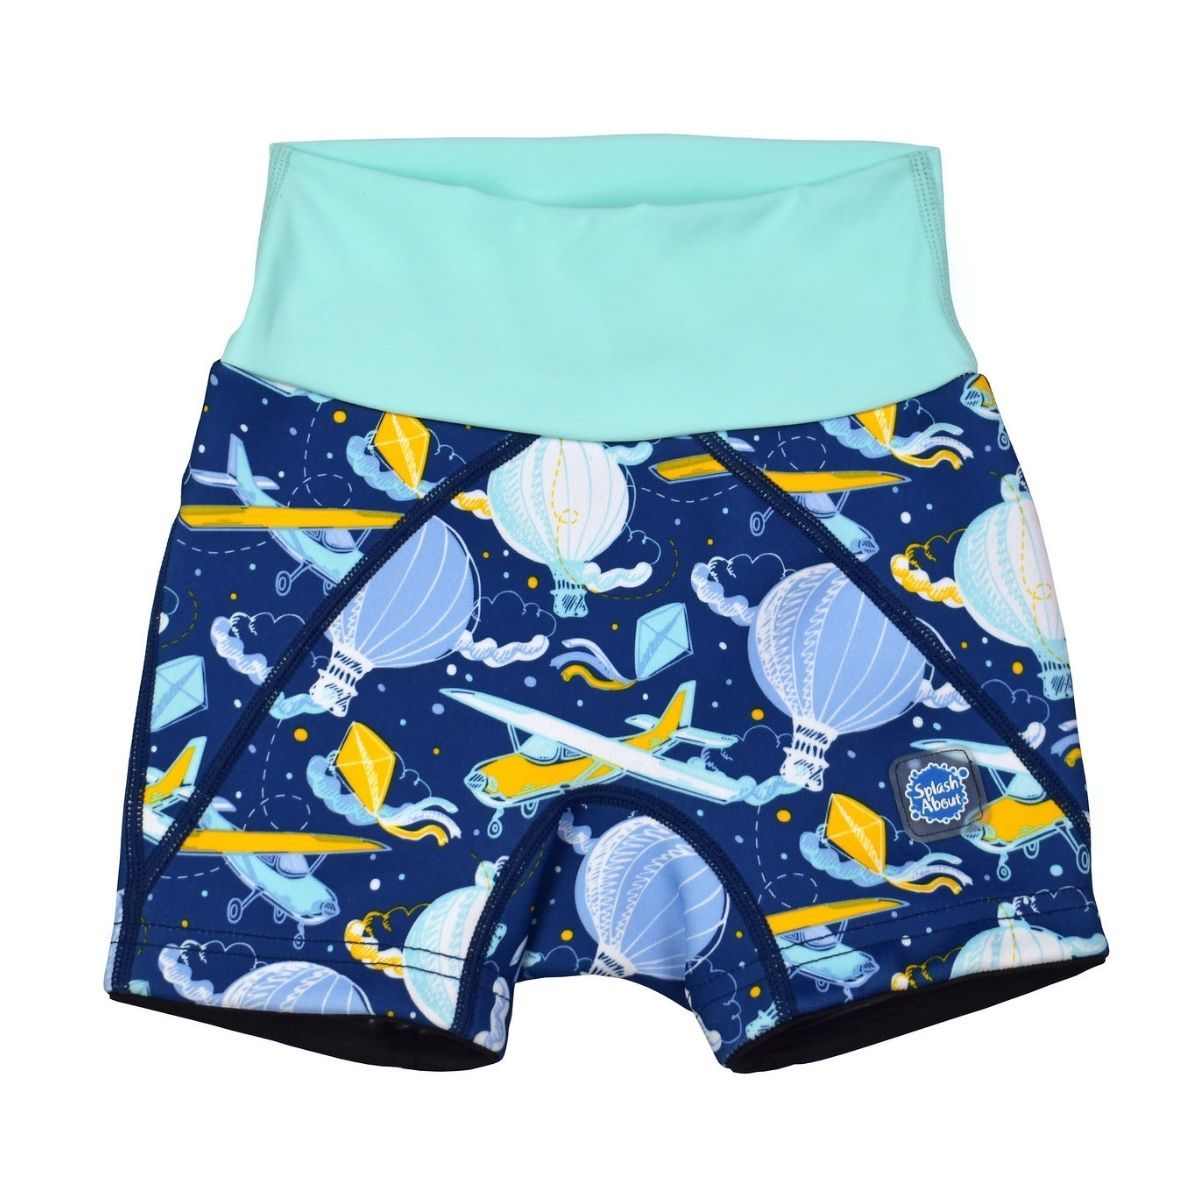 Neoprene swim shorts in navy blue with light green waist and hot air balloons themed print, including airplanes, kites and clouds. Front.